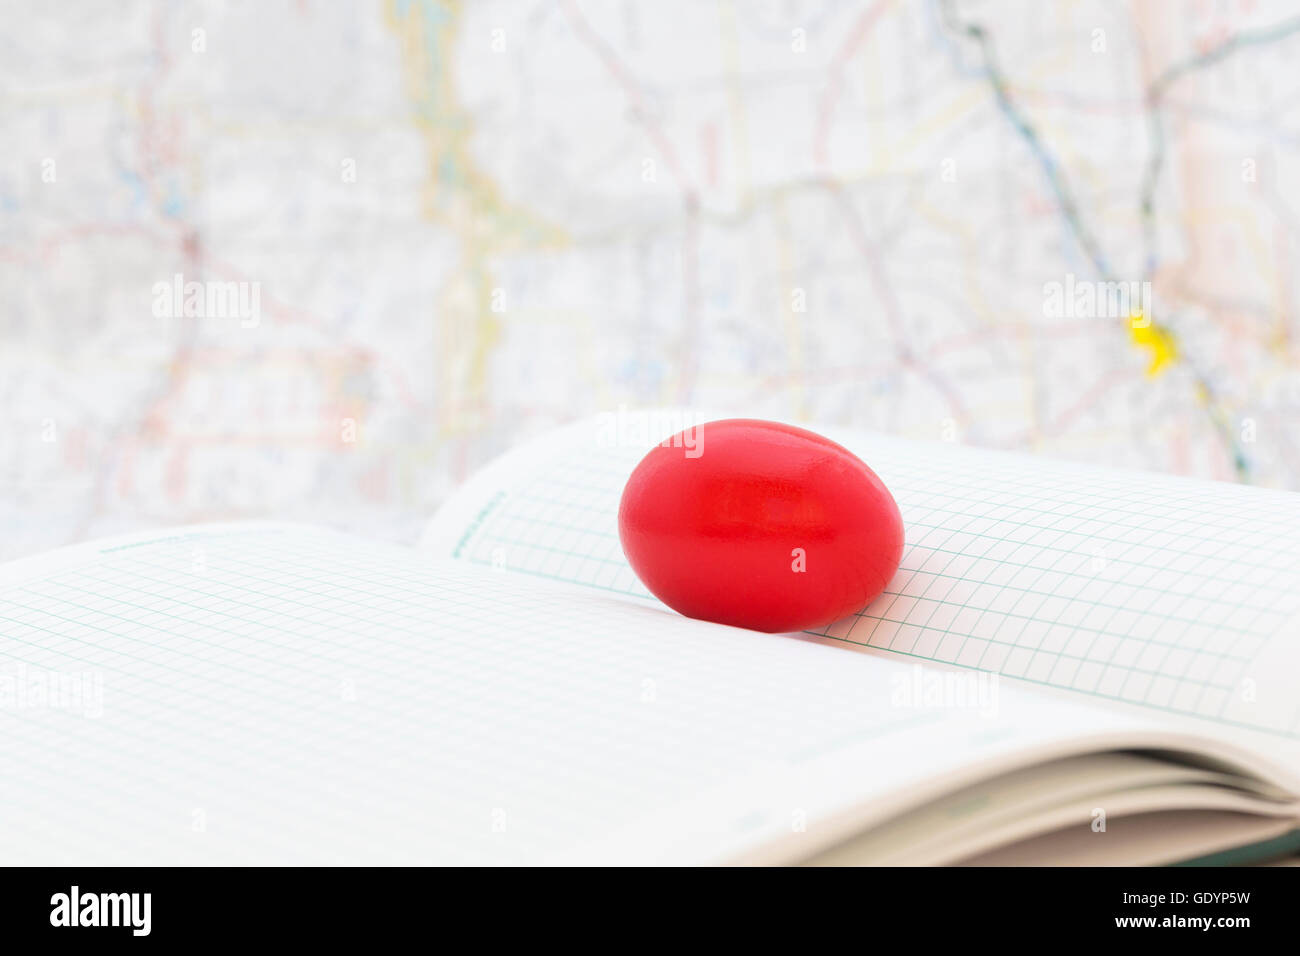 Red egg on ledger pages with map behind shows troubled financial and business times.  Selective focus on key, nest egg symbol. Stock Photo